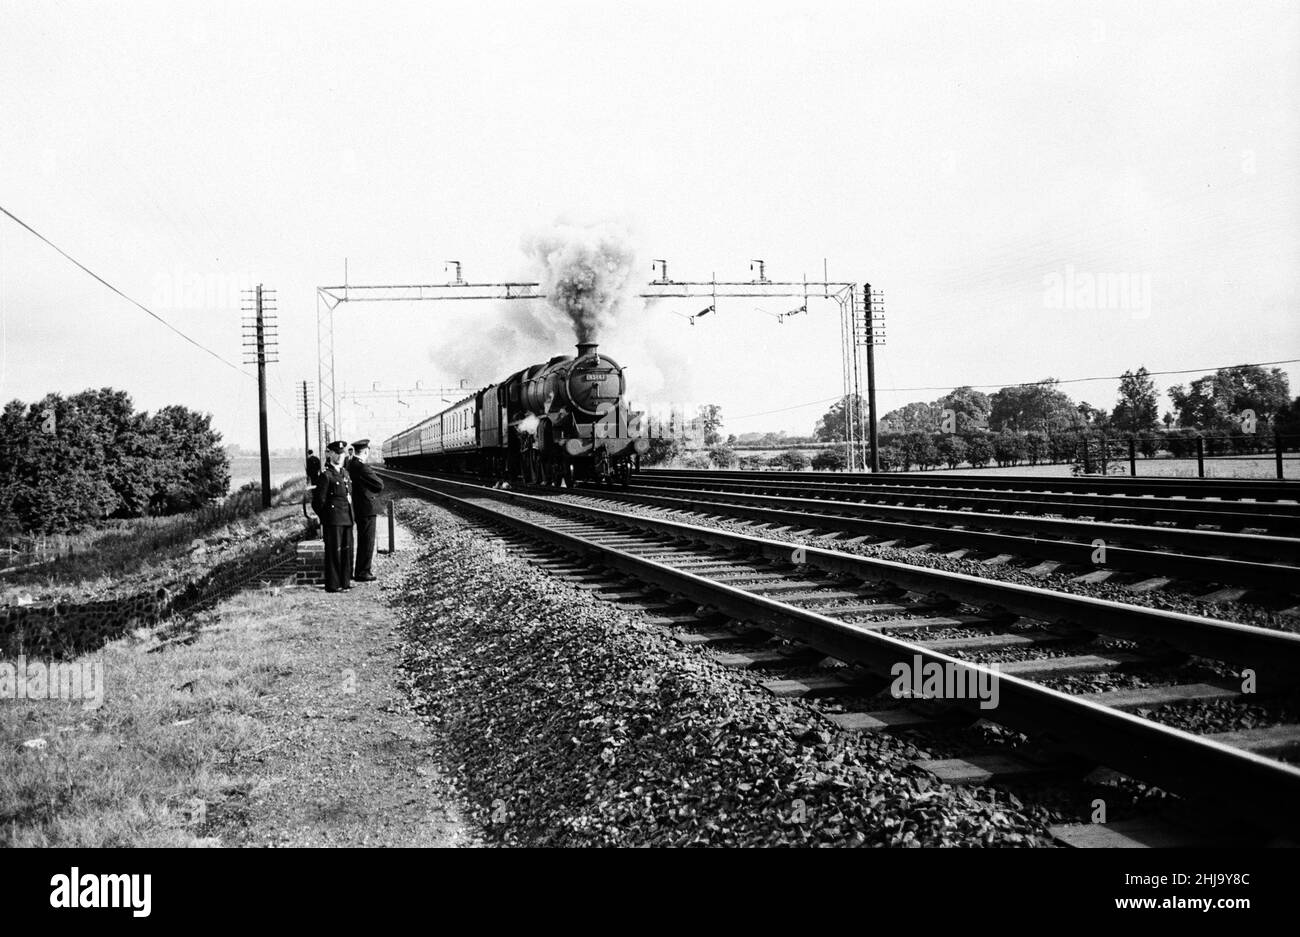 1963 Great Train Robbery was the robbery of ¿.6 million from a Royal Mail train heading from Glasgow to London on the West Coast Main Line in the early hours of 8th August 1963, at Bridego Railway Bridge, Ledburn, near Mentmore in Buckinghamshire, England. After tampering with the lineside signals in order to bring the train to a halt, a gang attacked the train.  Our Picture Shows ... Passenger Train passing by on West Coast Main Line. Stock Photo